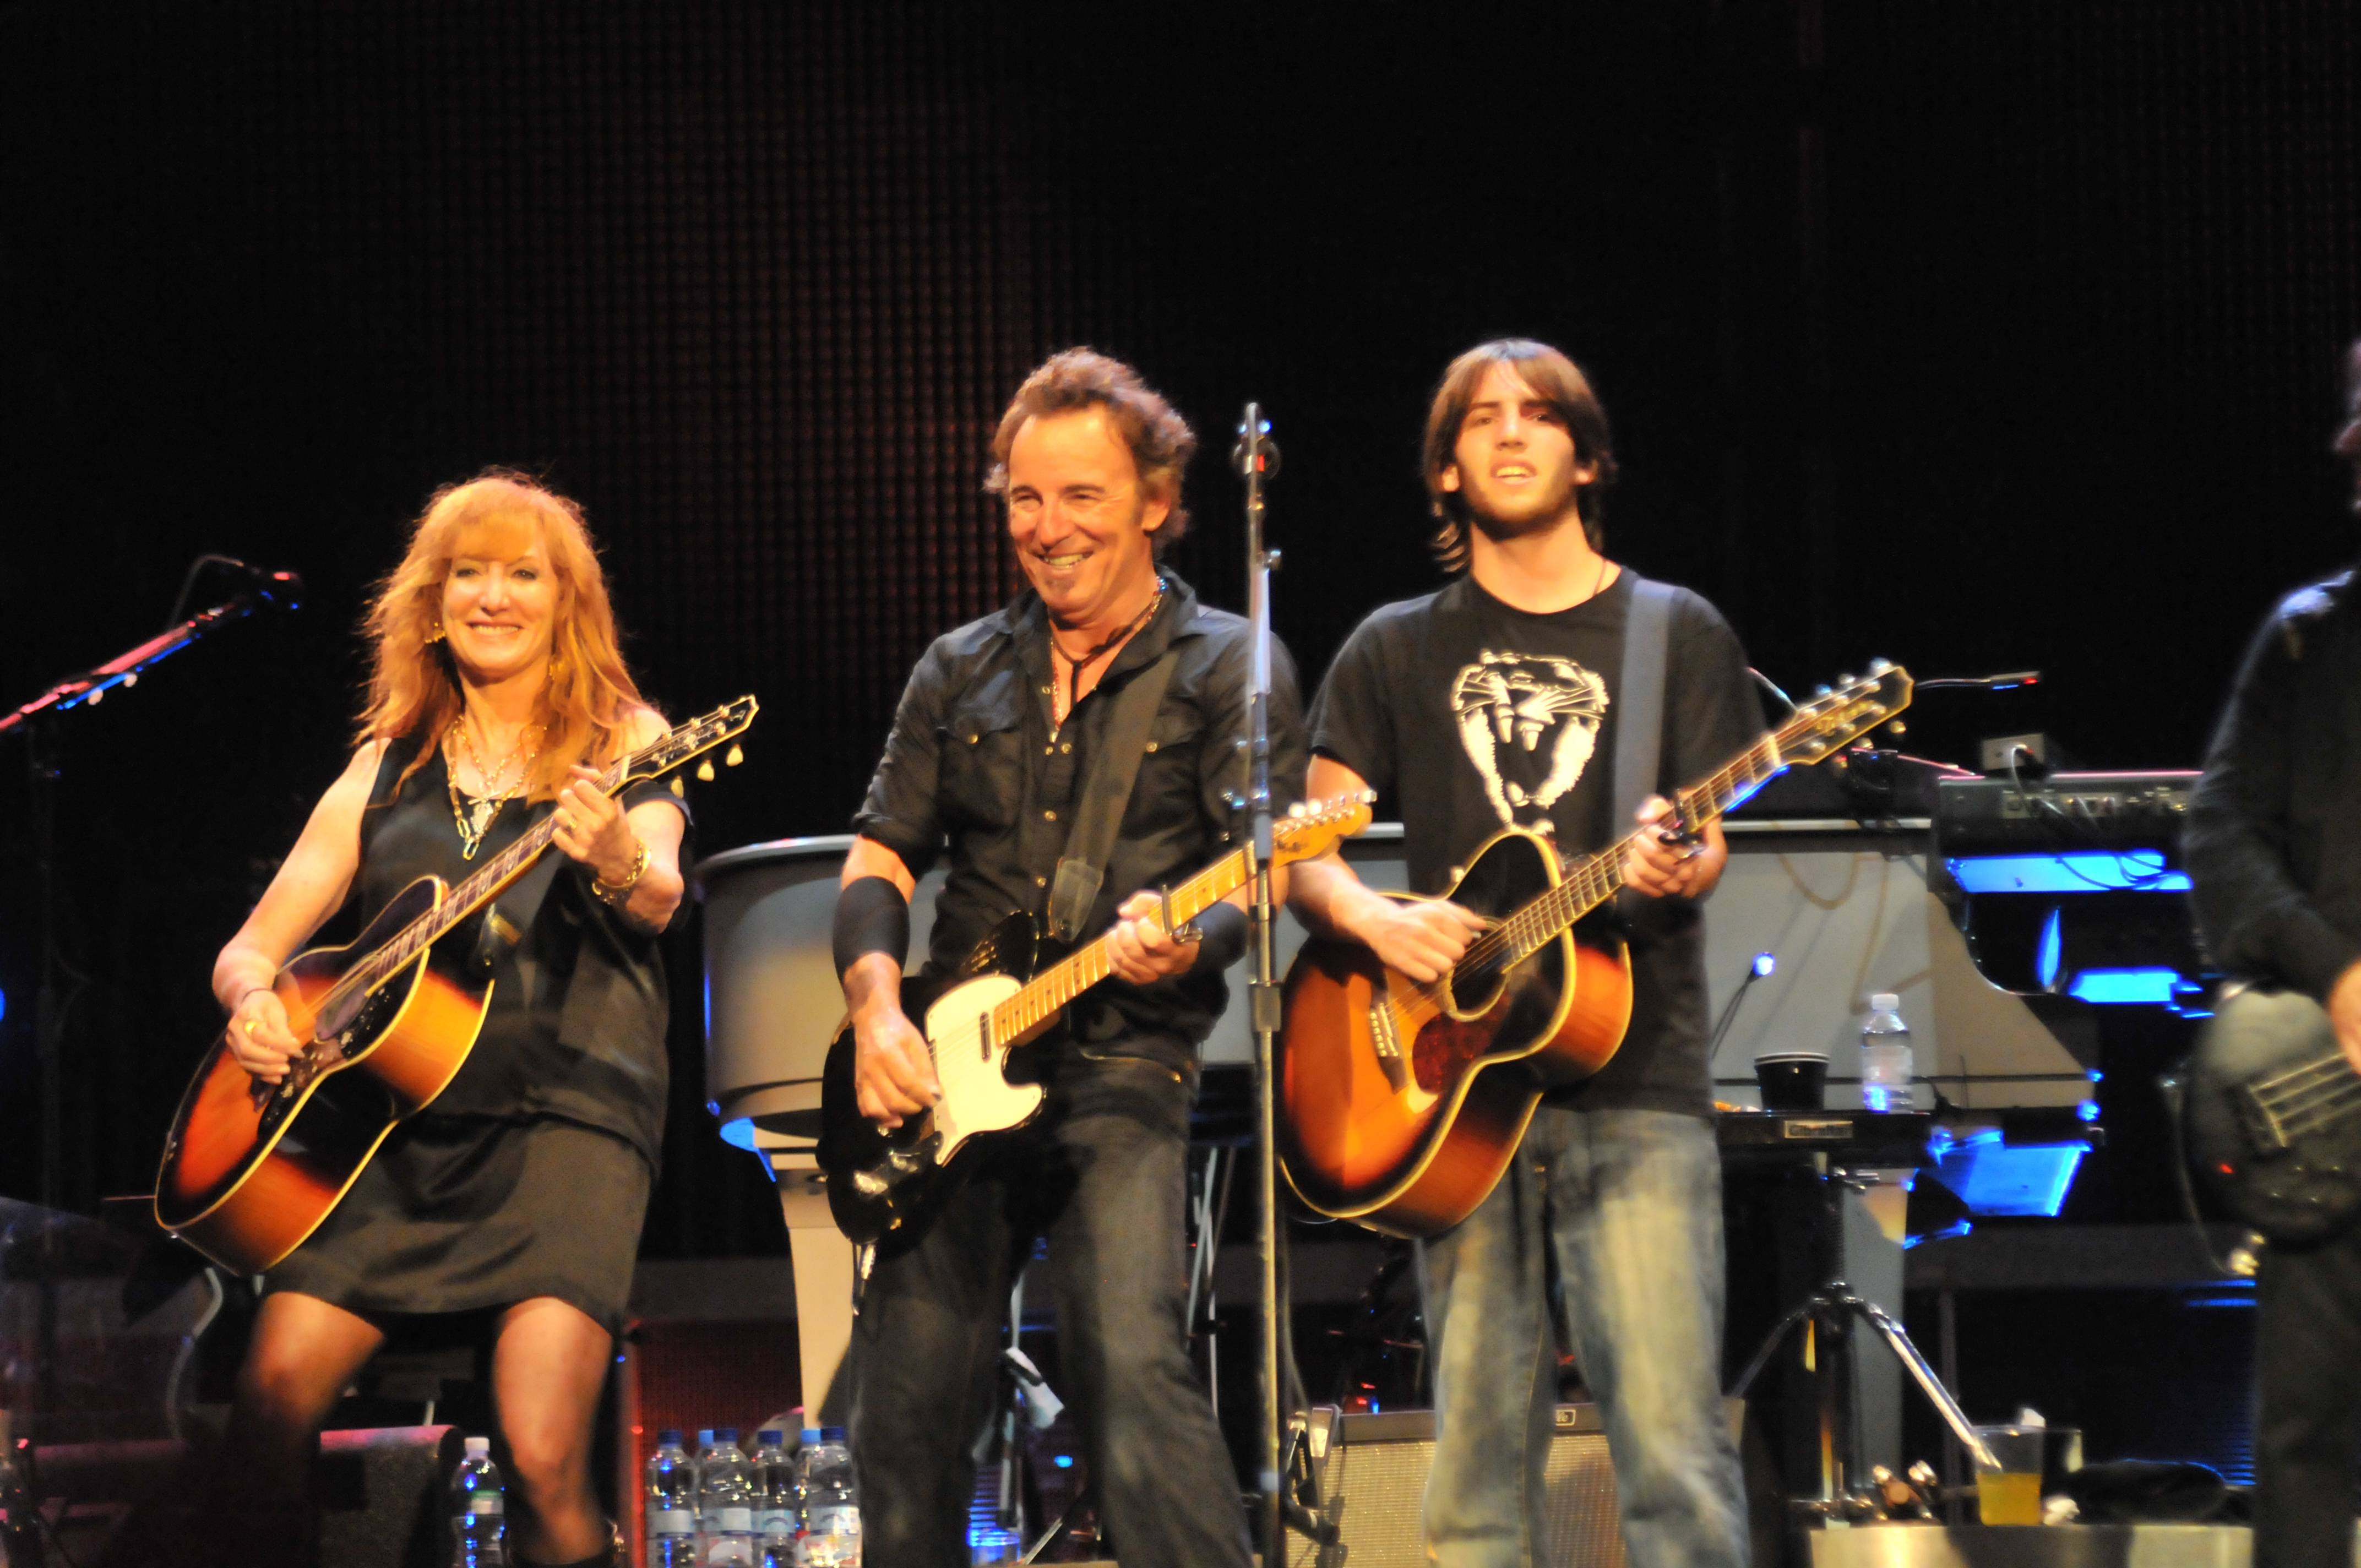 Patti Scialfa, Bruce Springsteen and their son Evan Springsteen performing live onstage in Spain. | Source: Getty Images